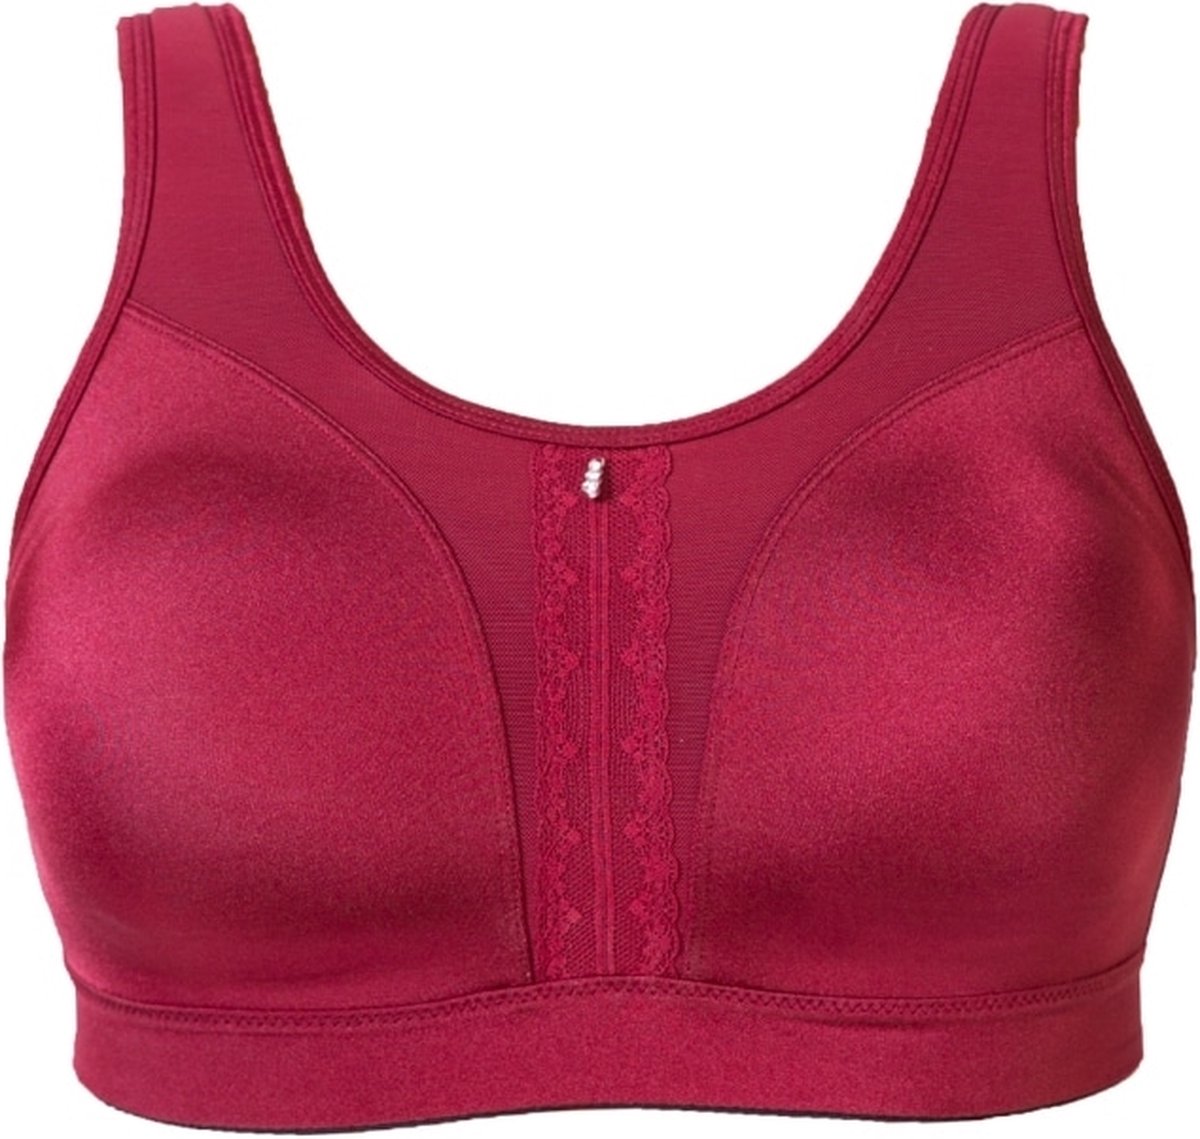 High impact Sport BH (zonder beugel) Cannes, Deep Red / Bordeaux rood, maat: 95I